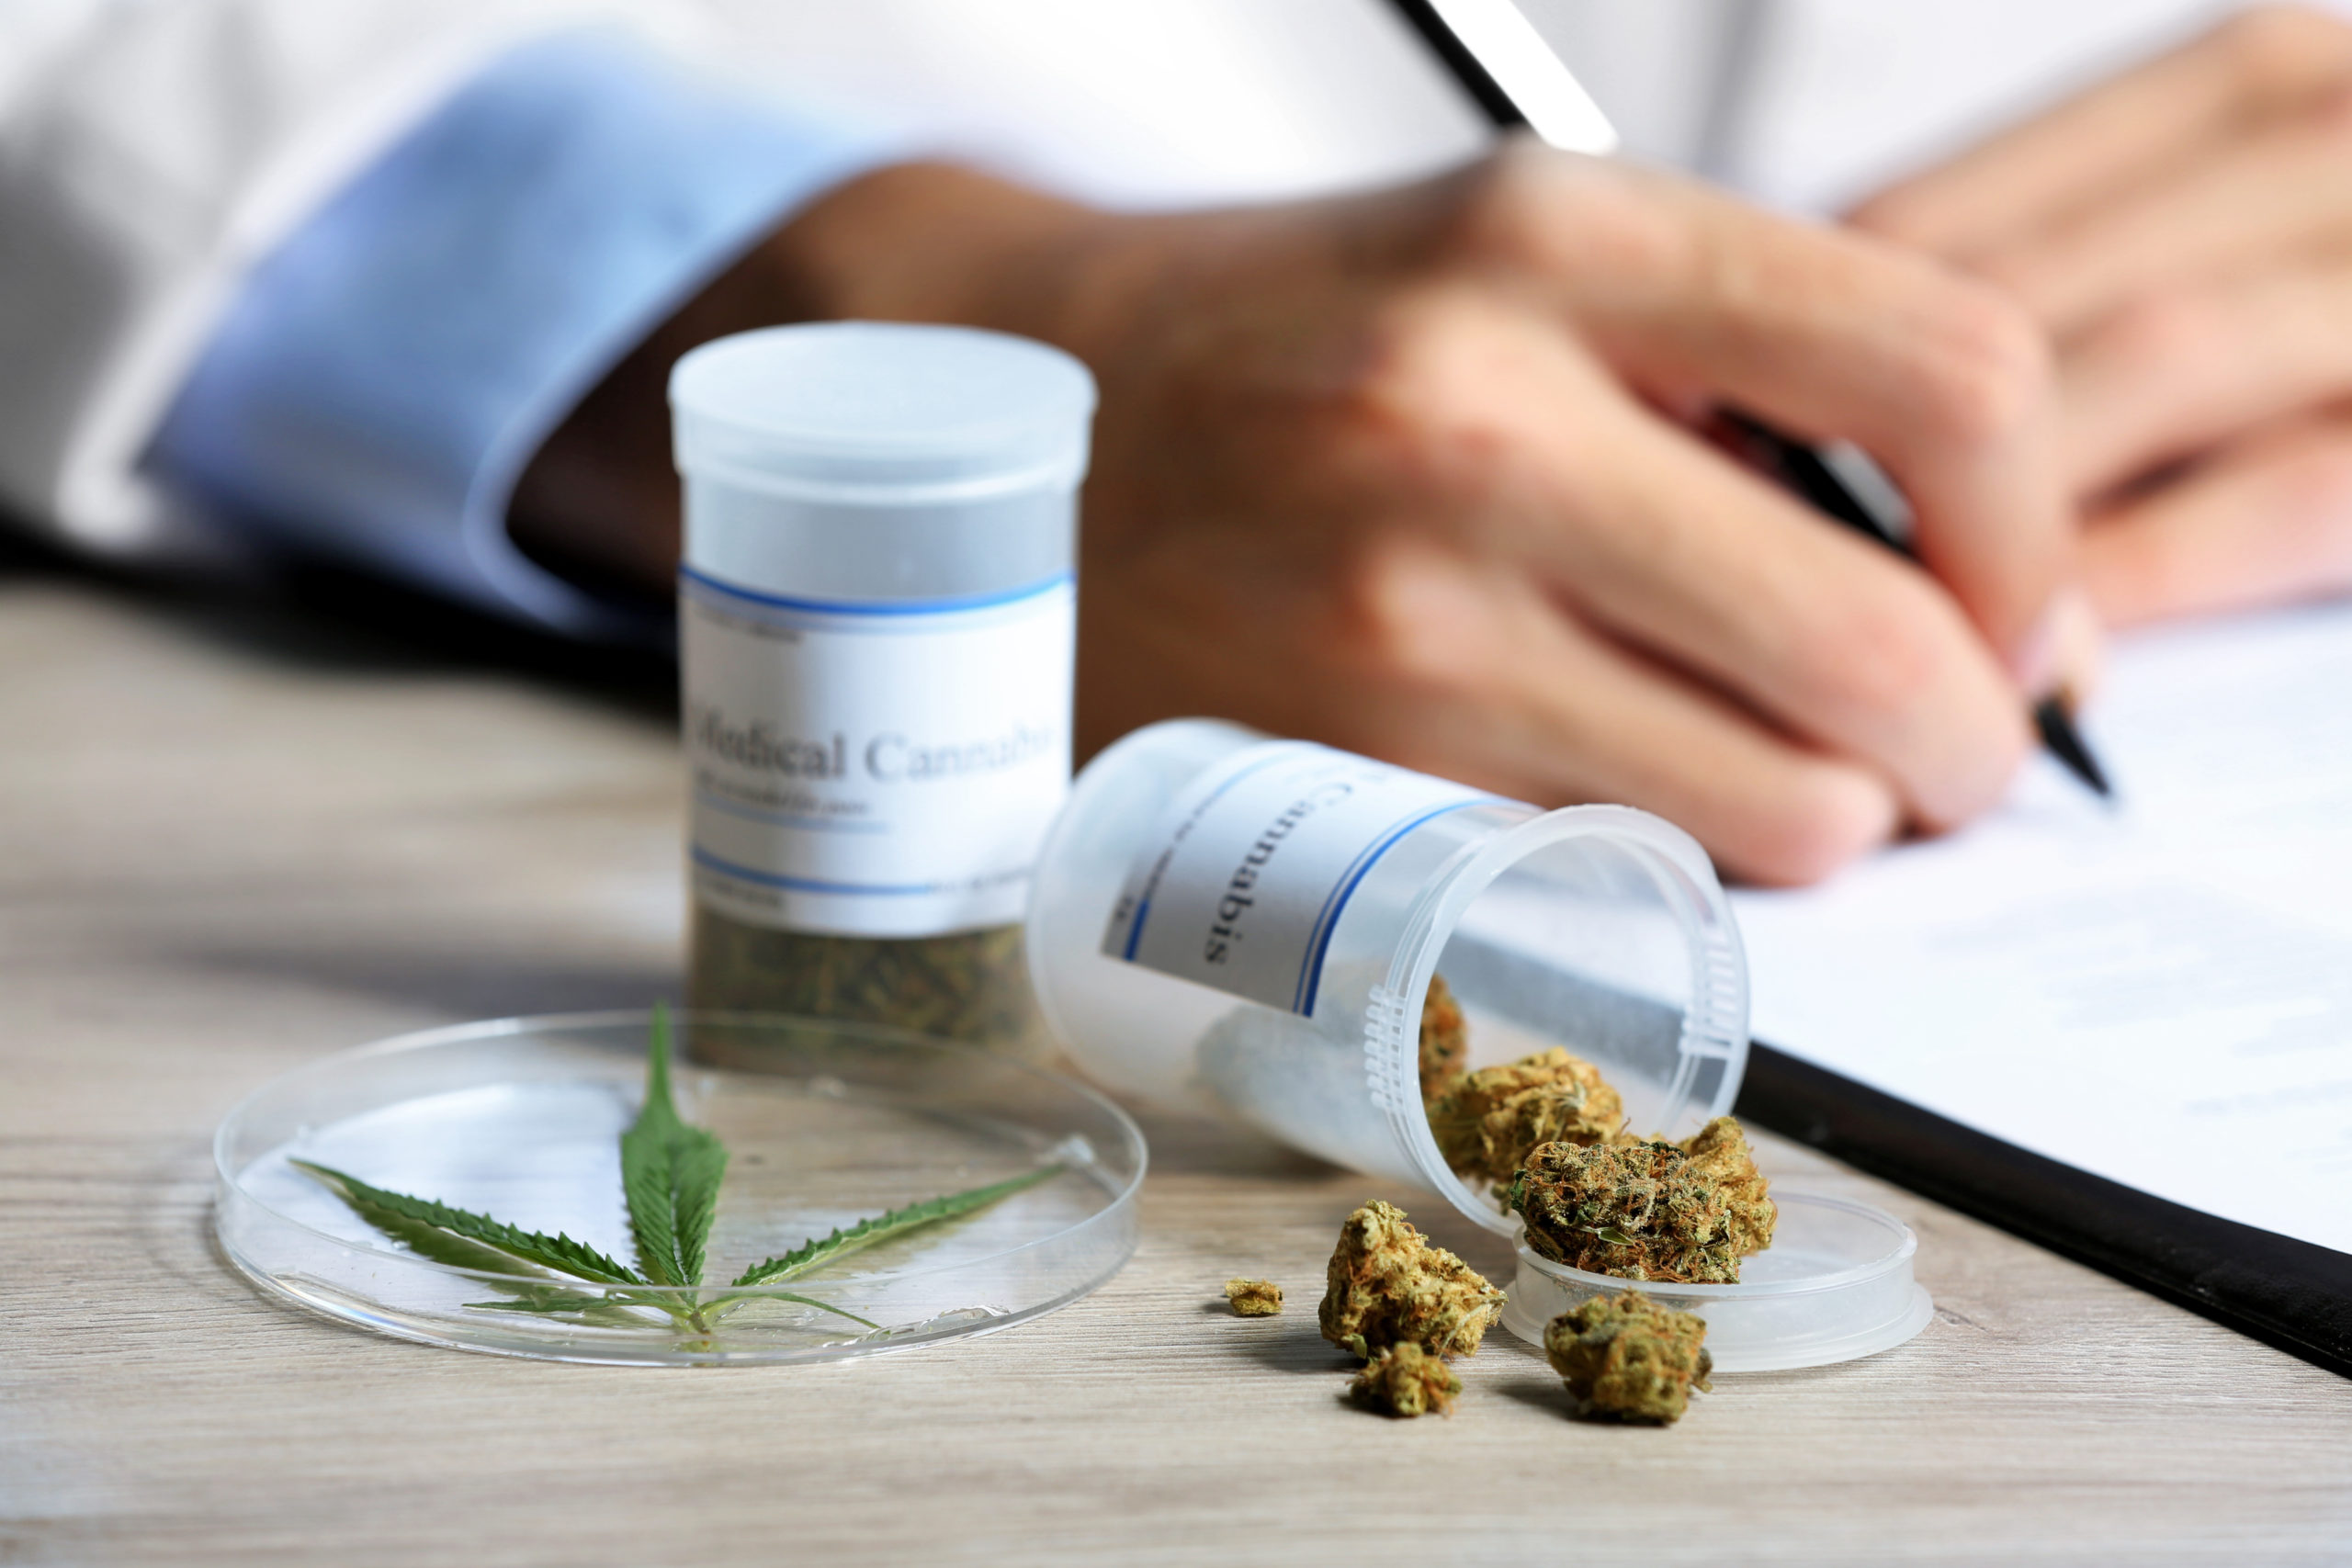 Scotland Opens First Medical Cannabis Clinic to Treat Chronic Pain.